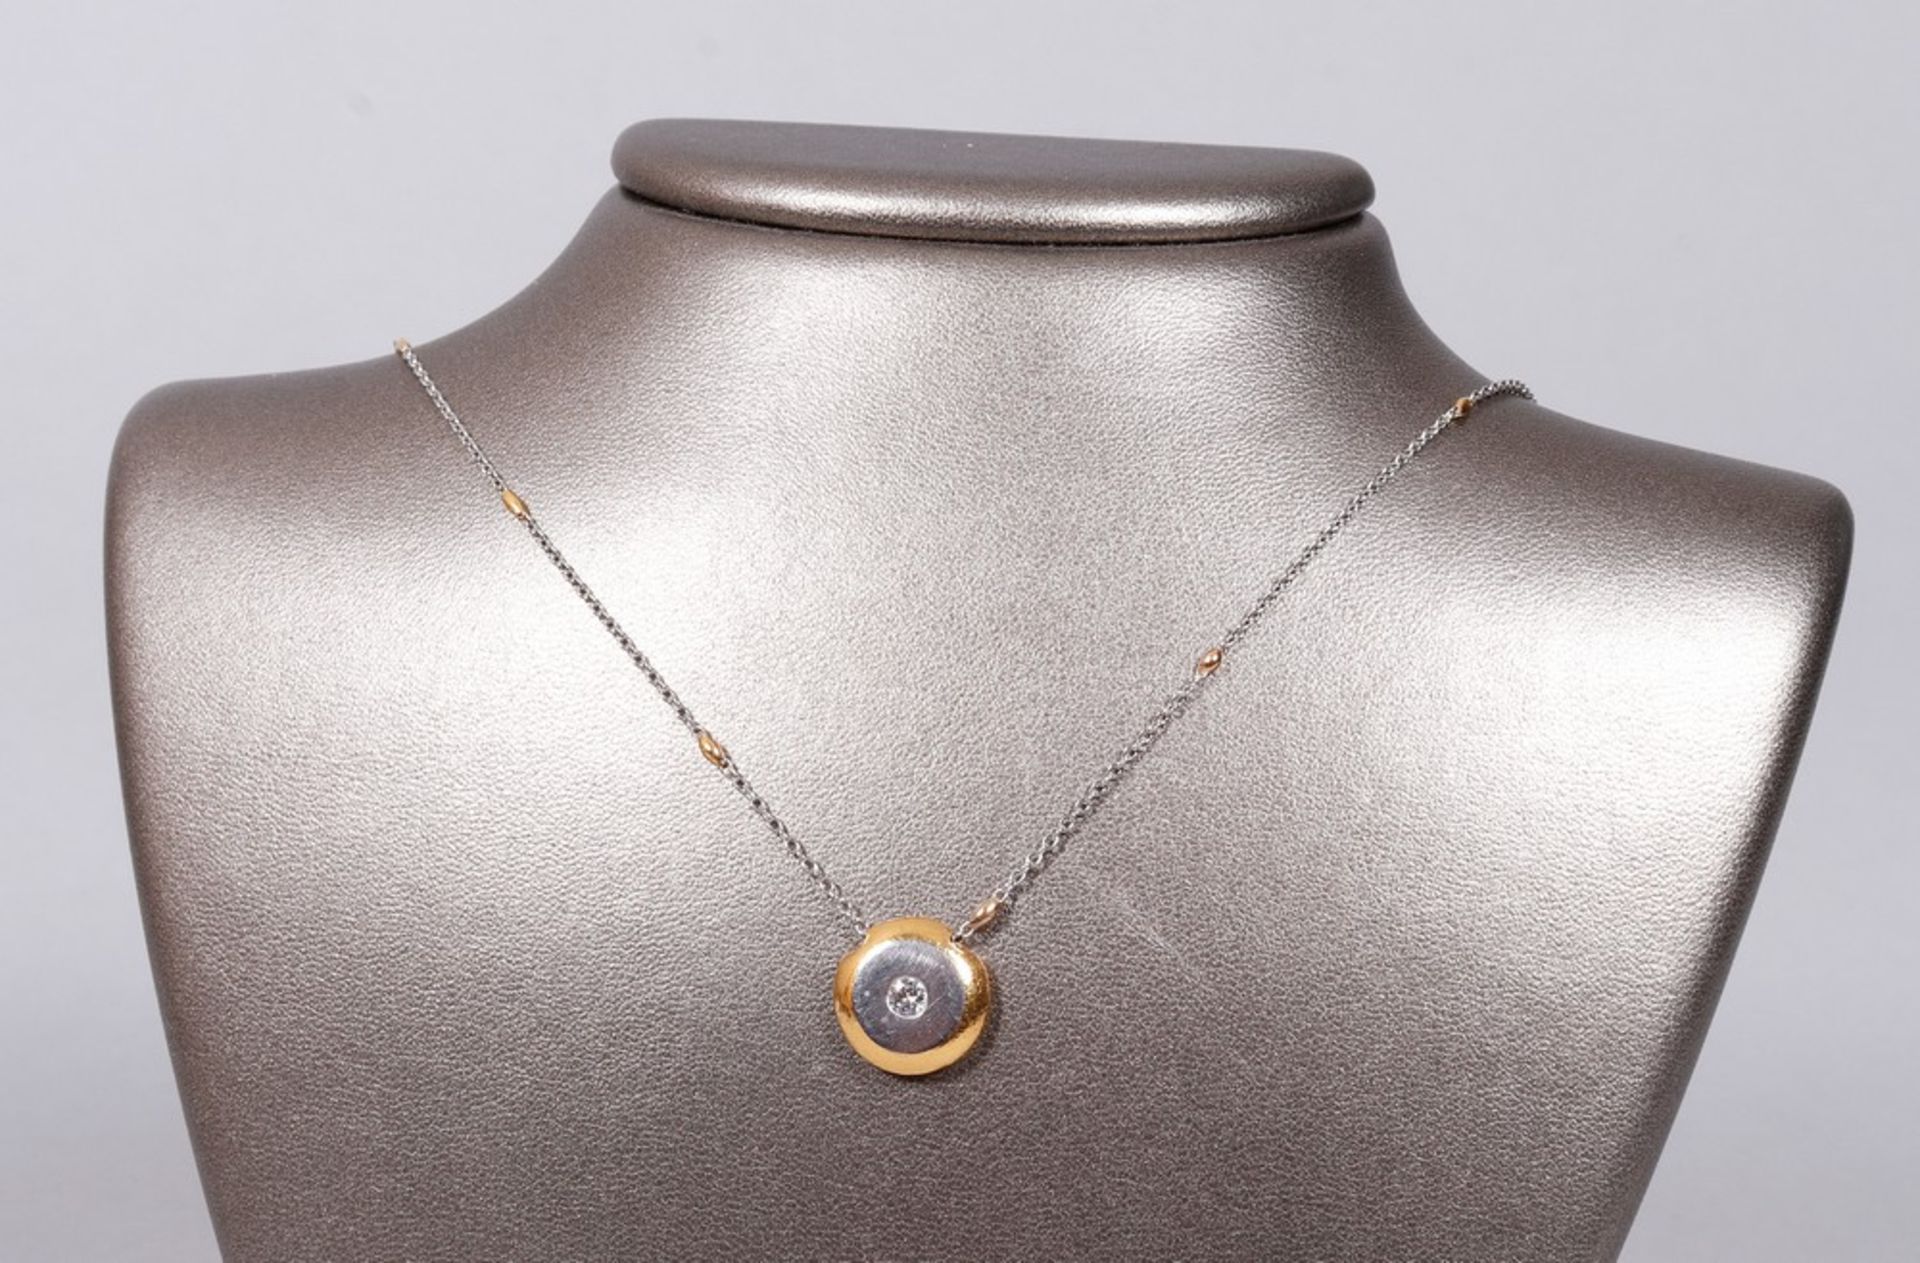 Necklace, pendant on chain, 950 platinum and fine gold, Niessing